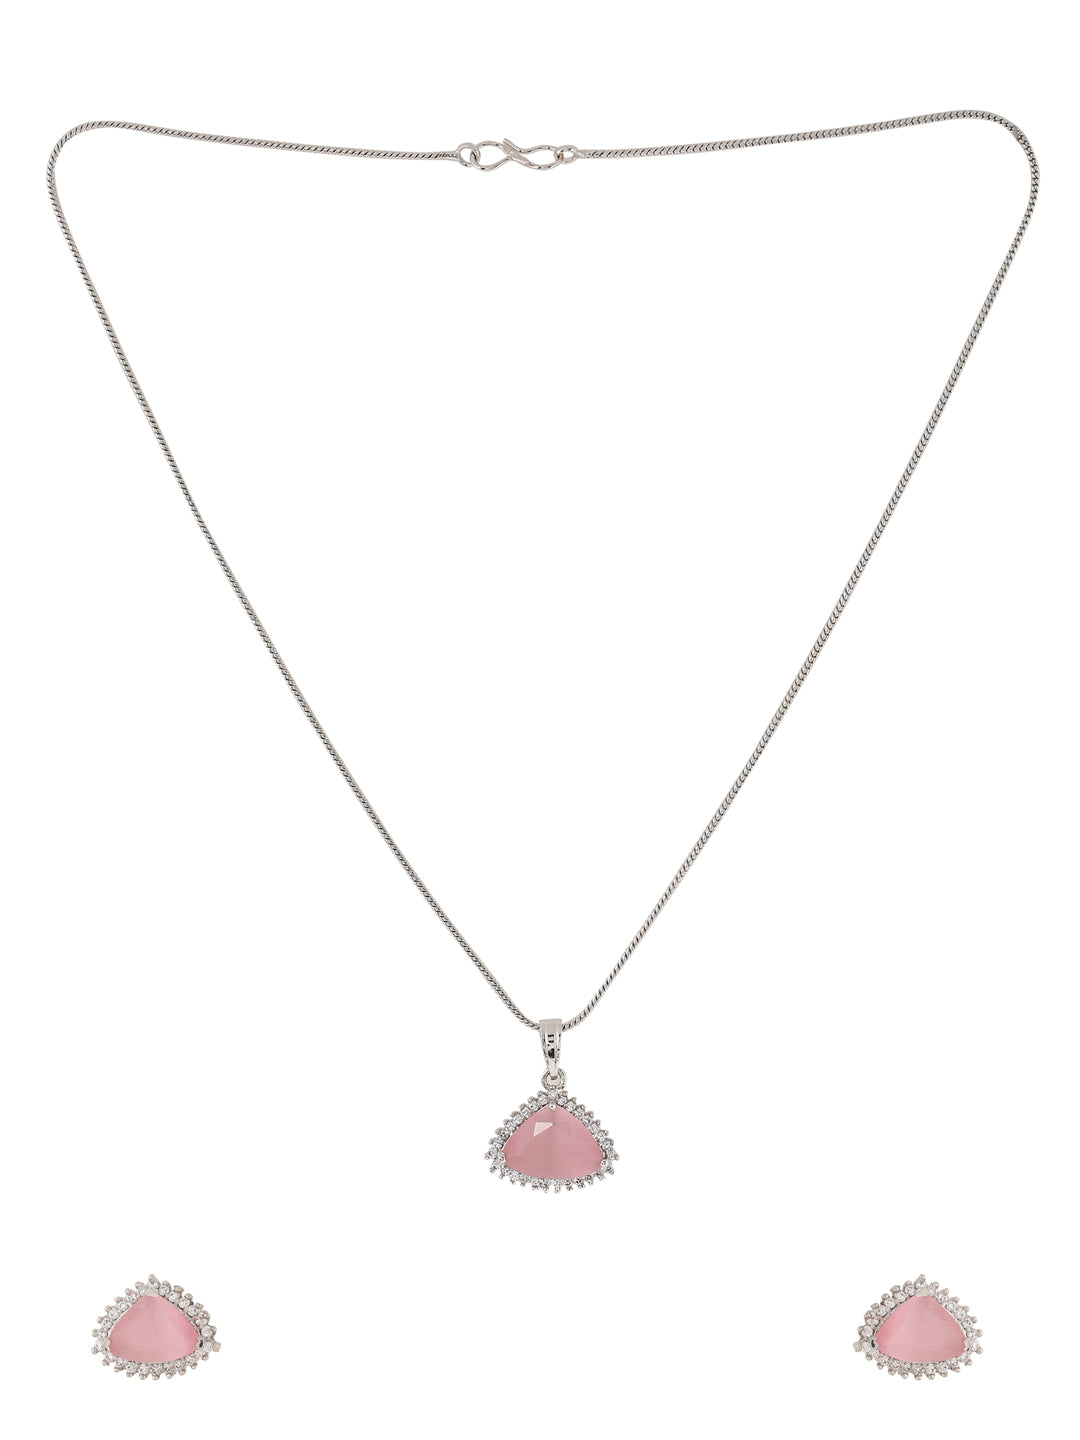 ad-chain-pendant-with-earrings-pink-viraasi